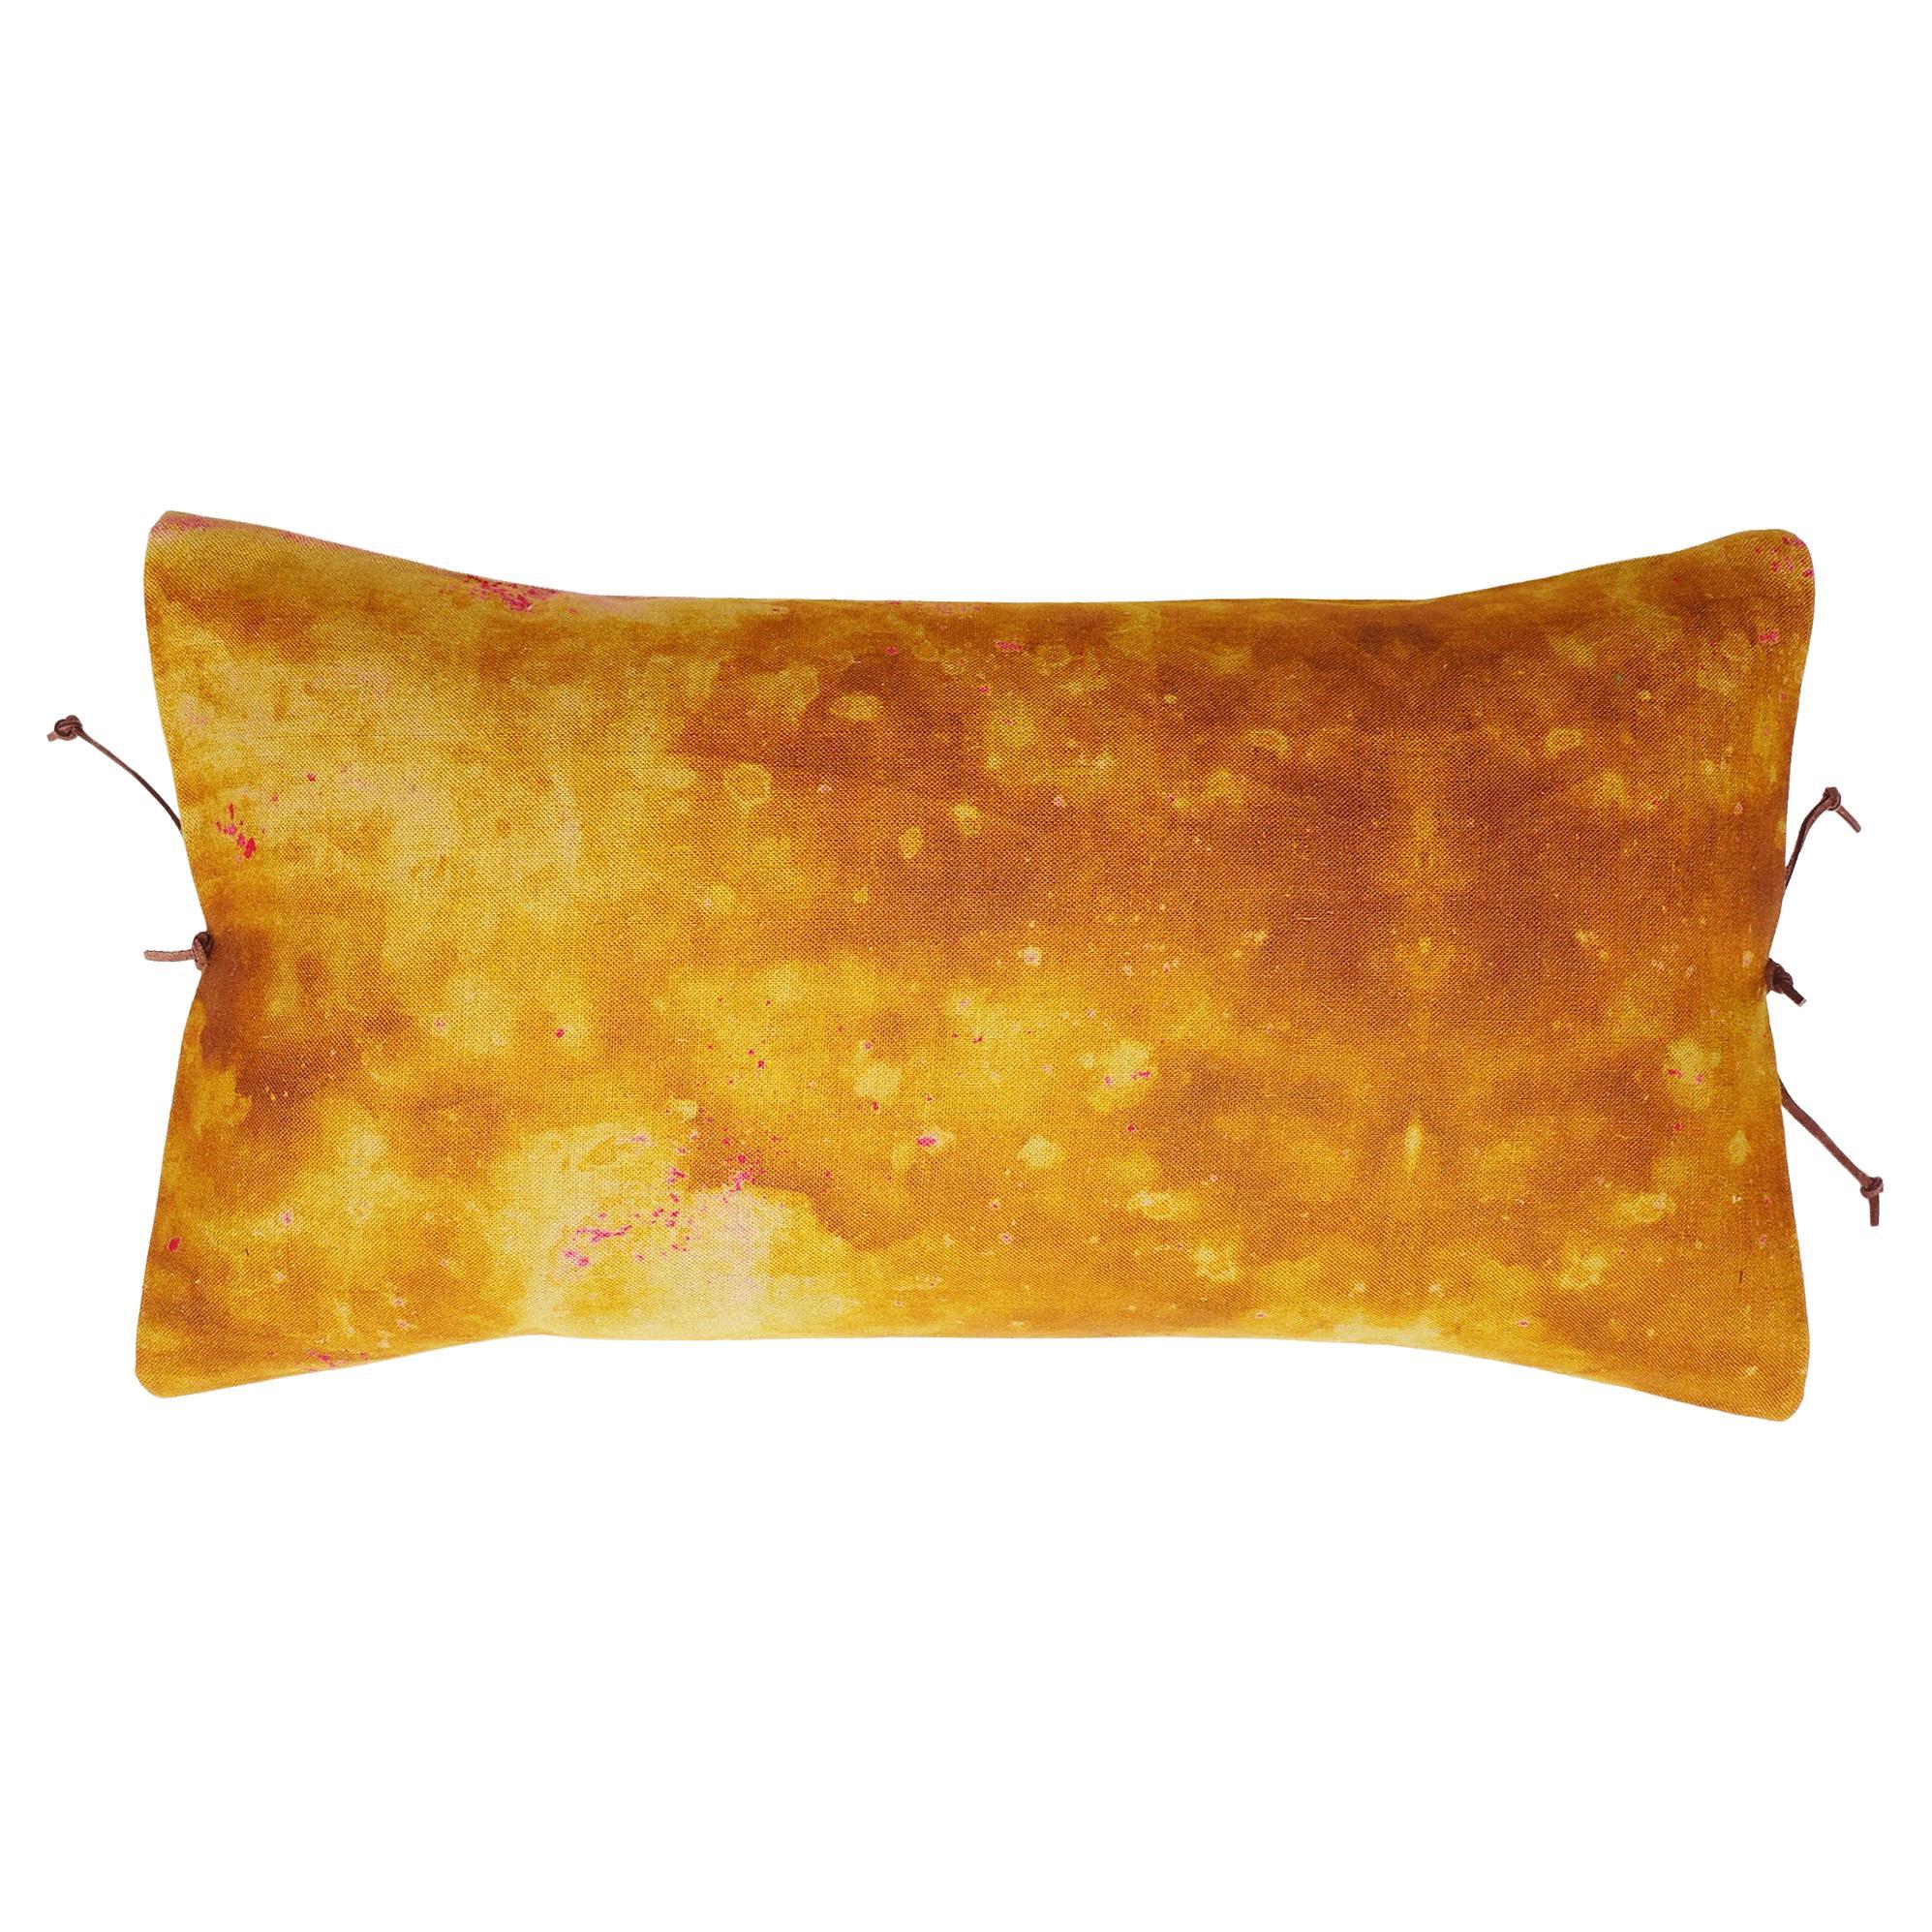 Printed Linen Pillow Cloudy Sunshine For Sale